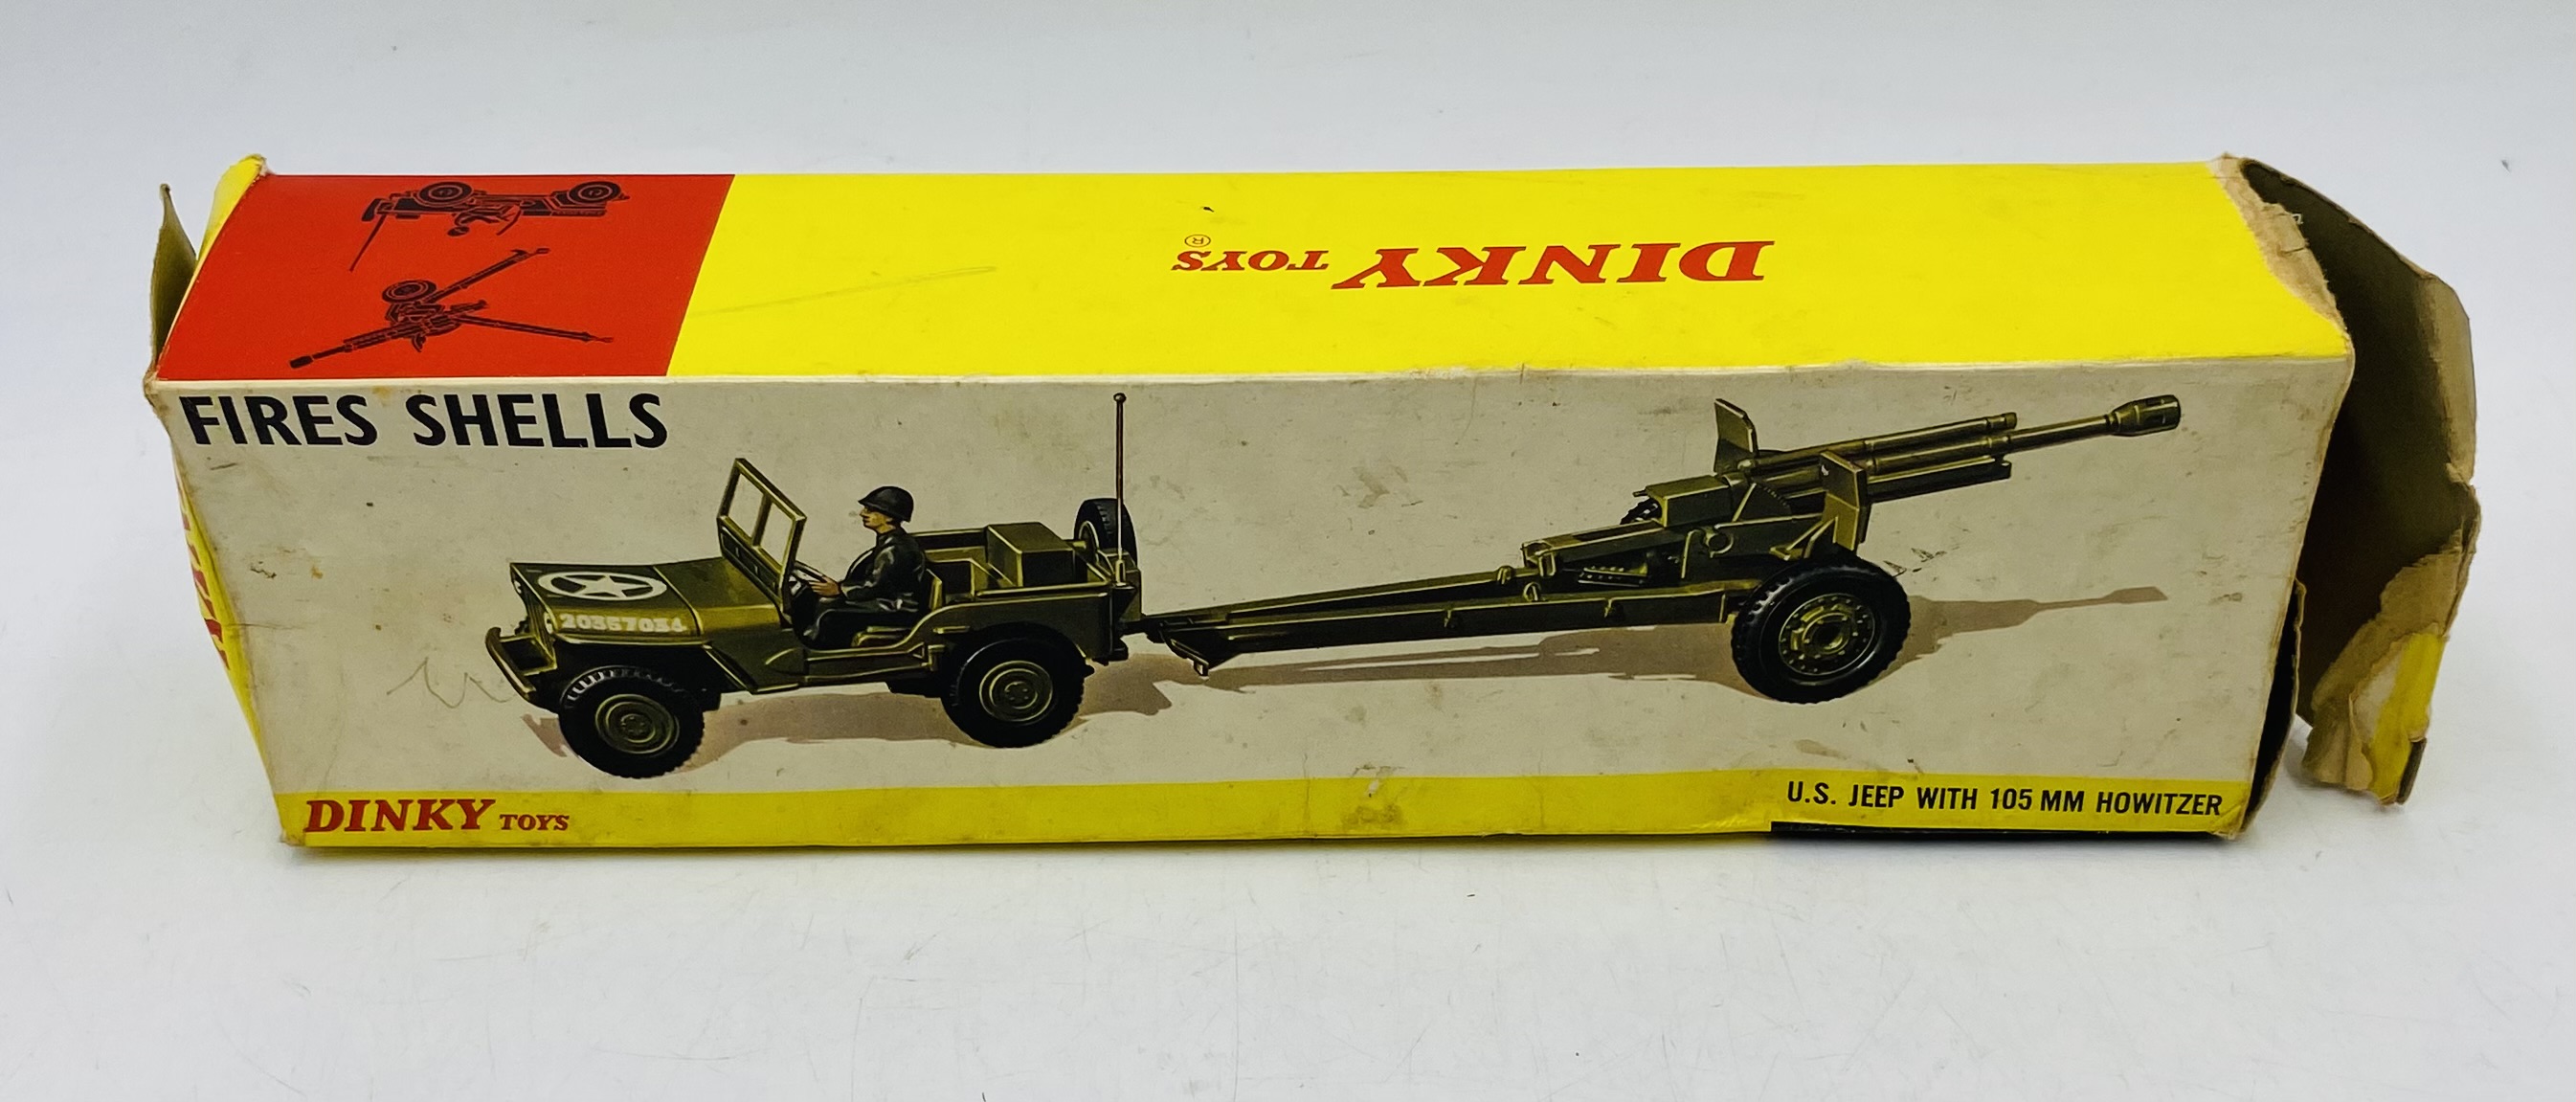 A vintage boxed Dinky Toys "U.S. Jeep with 105 MM Howitzer" with shell firing die-cast model (No - Image 8 of 10